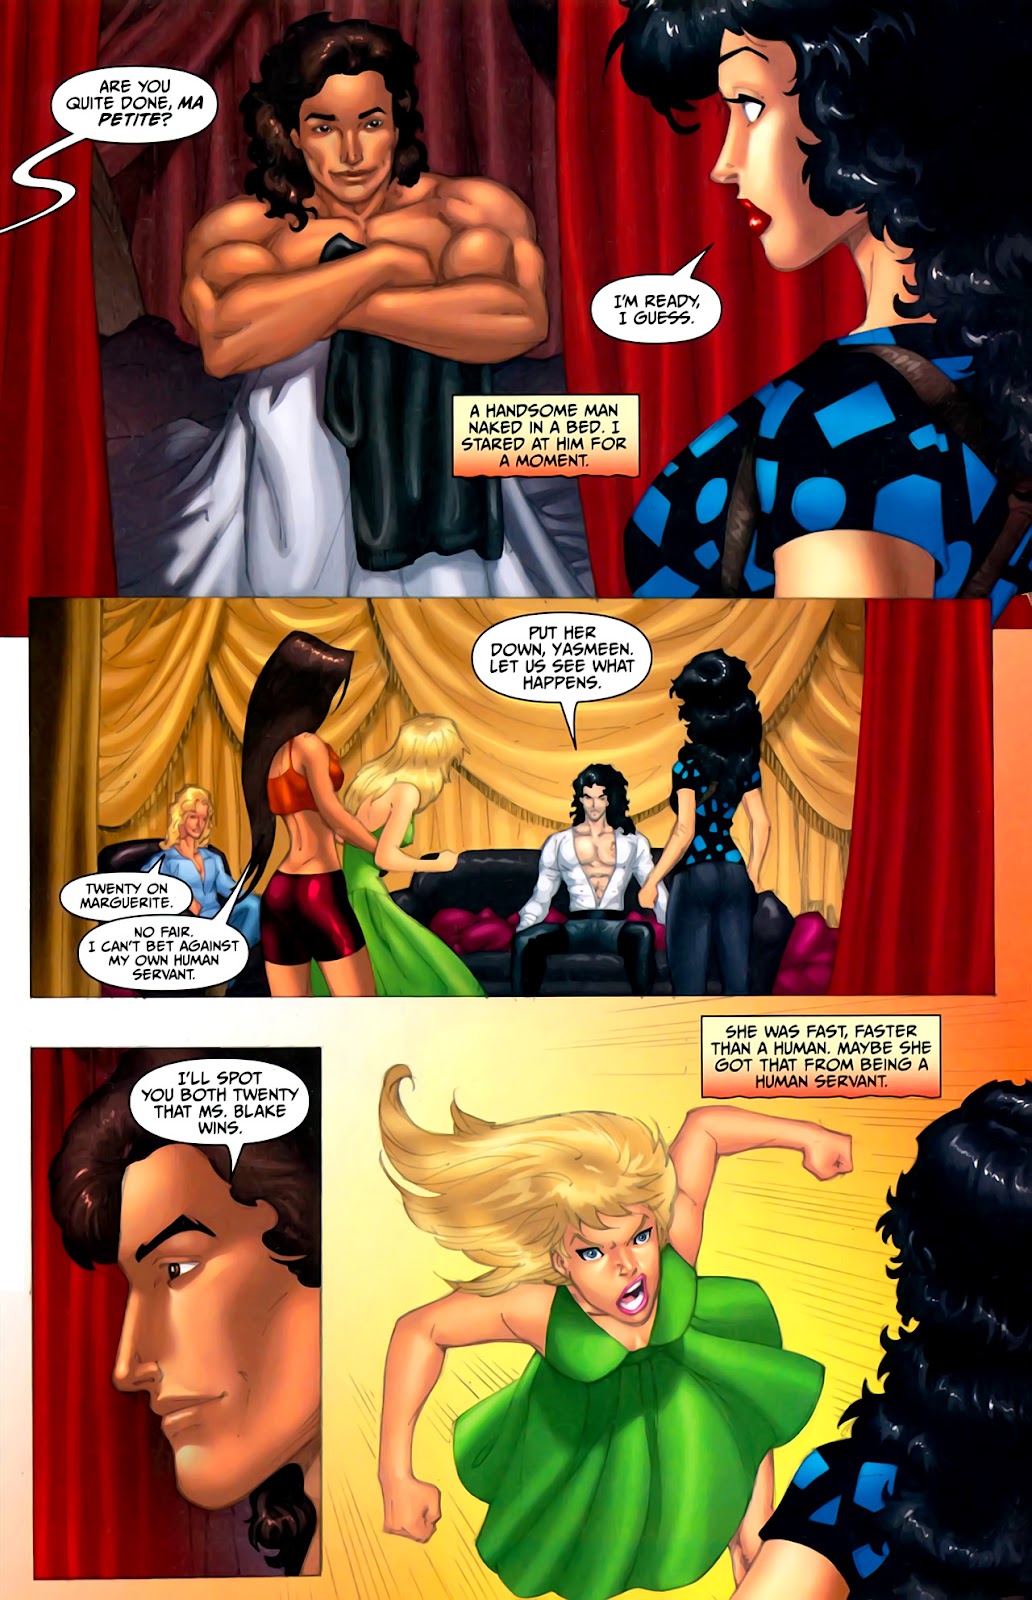 Anita Blake, Vampire Hunter: Circus of the Damned - The Charmer issue 2 - Page 24